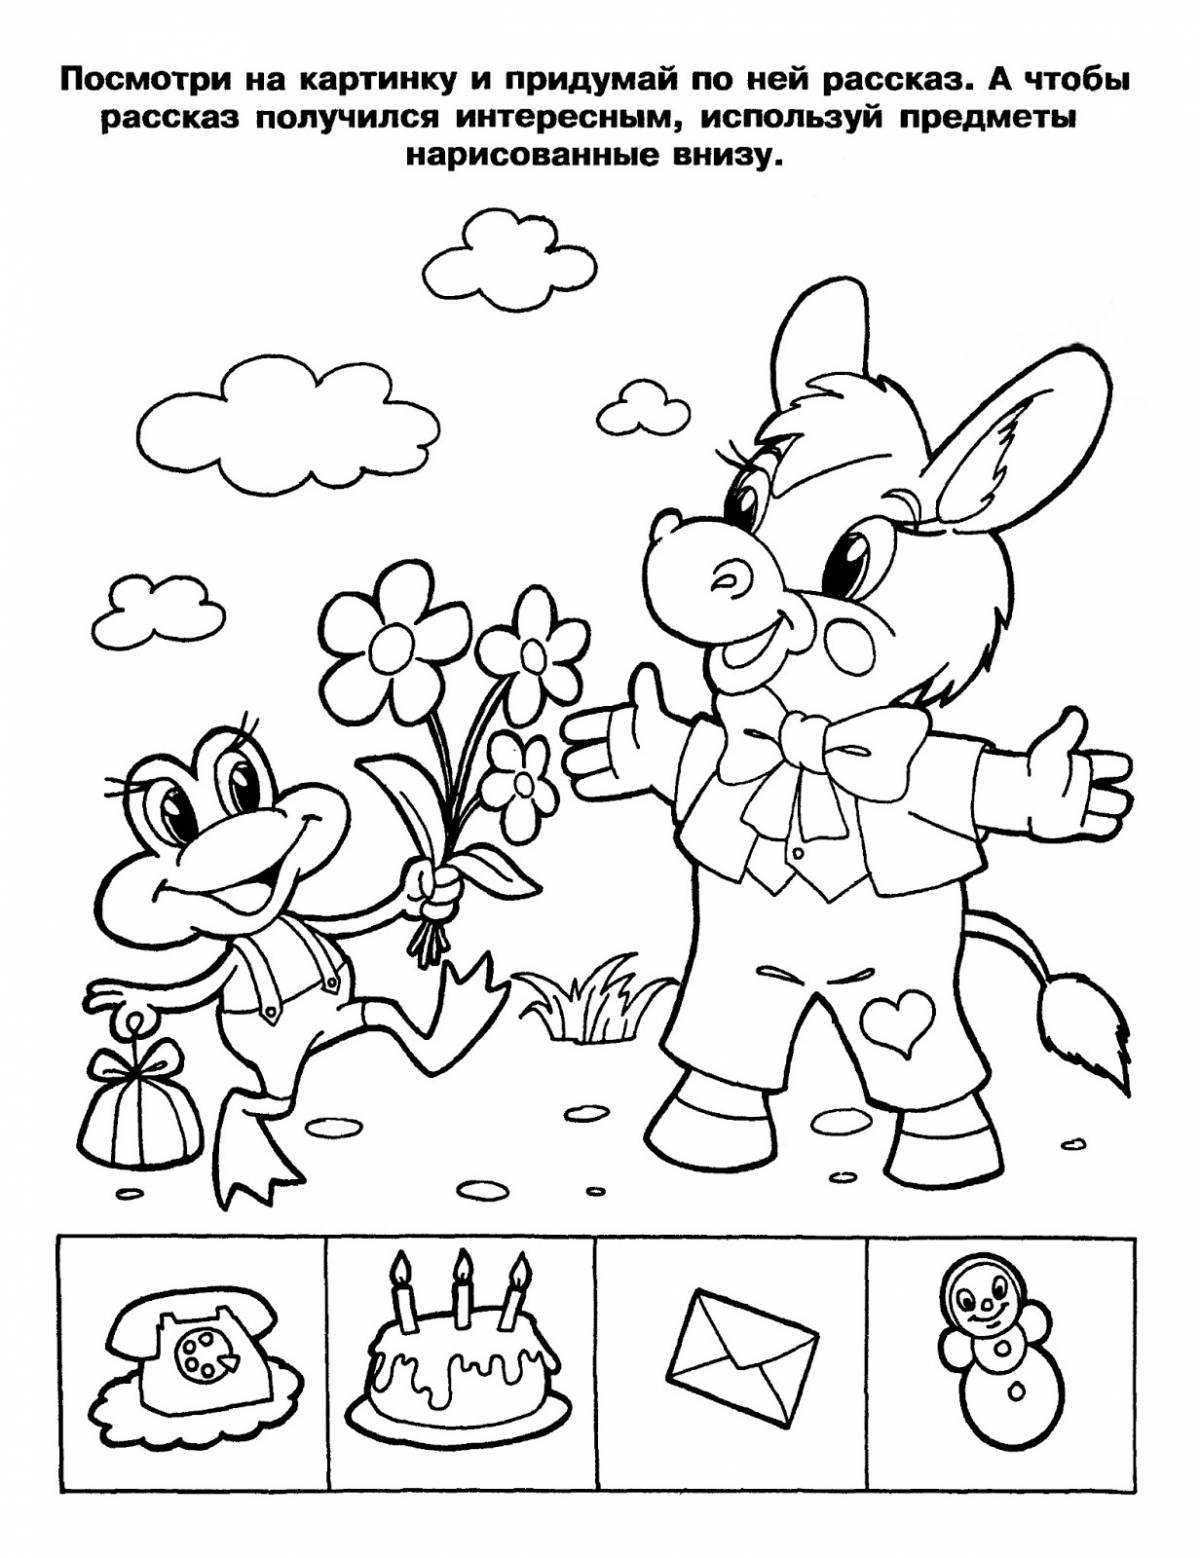 Exciting coloring book with fun activities for kids 6-7 years old